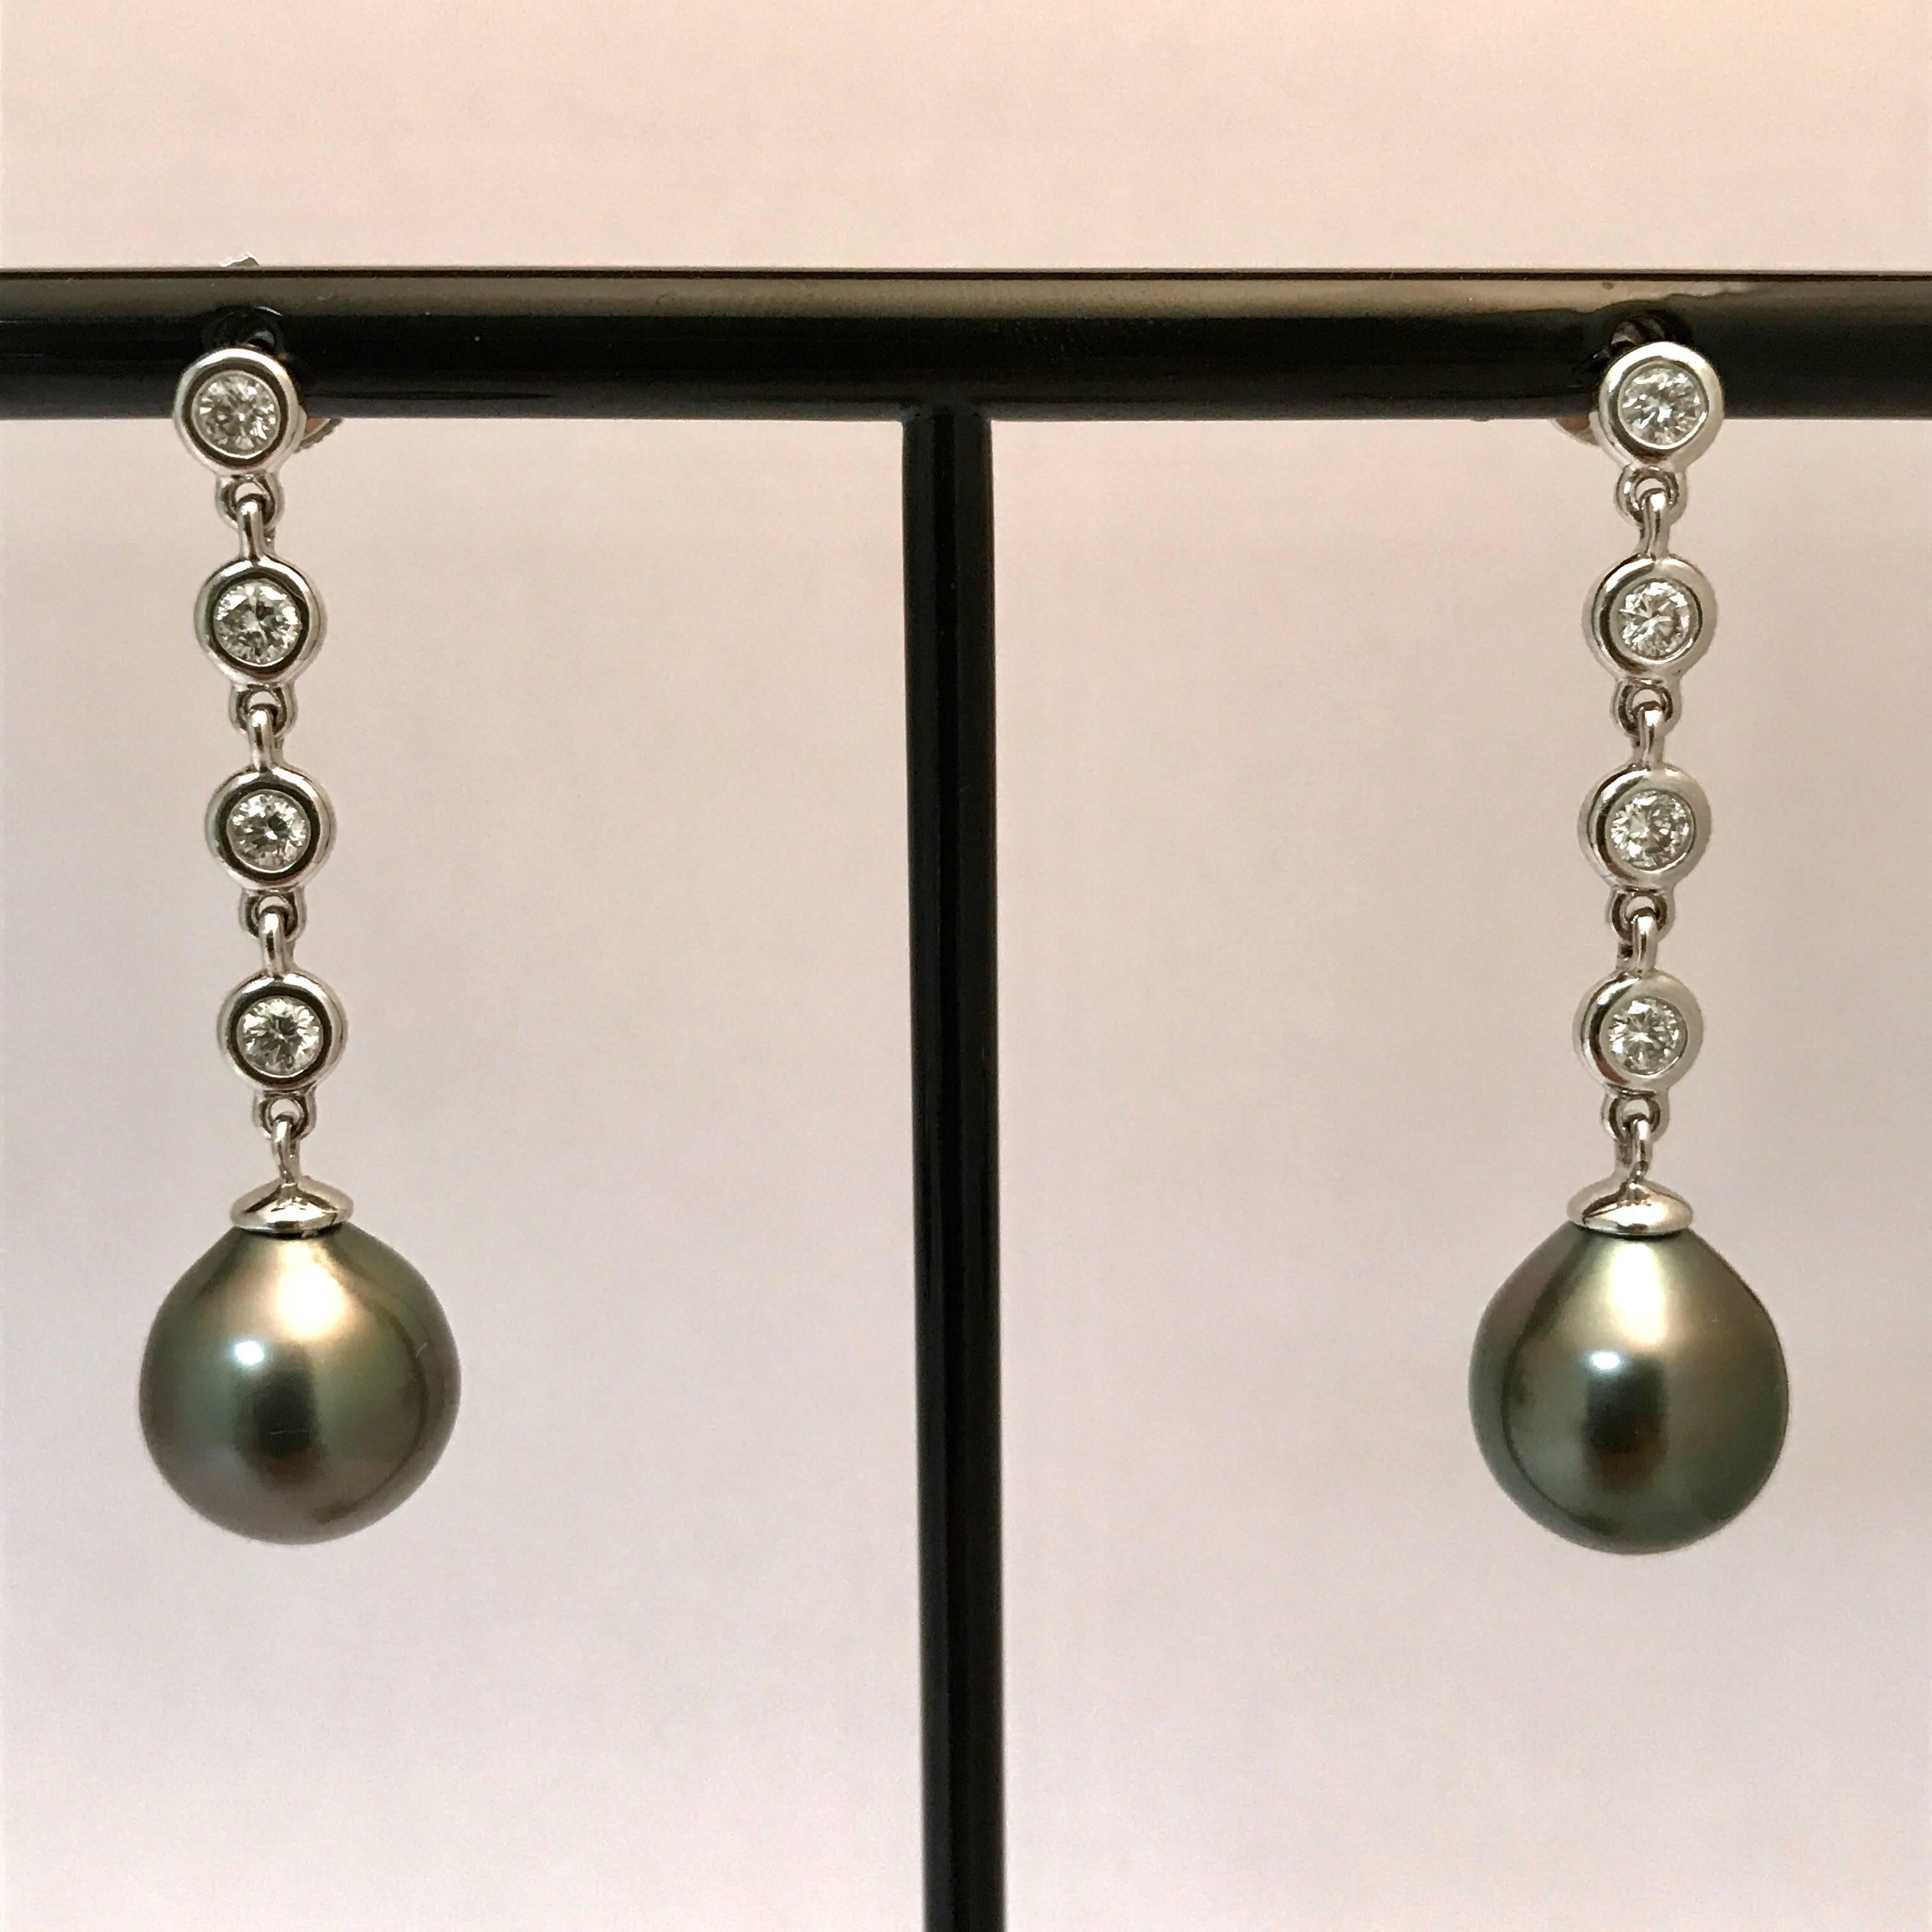 Discover the very essence of elegance with these exquisite earrings in white gold, beautifully adorned with sparkling diamonds and Tahitian cultured pearls. The pearls, renowned for their softness, tenderness and femininity, are like treasures from